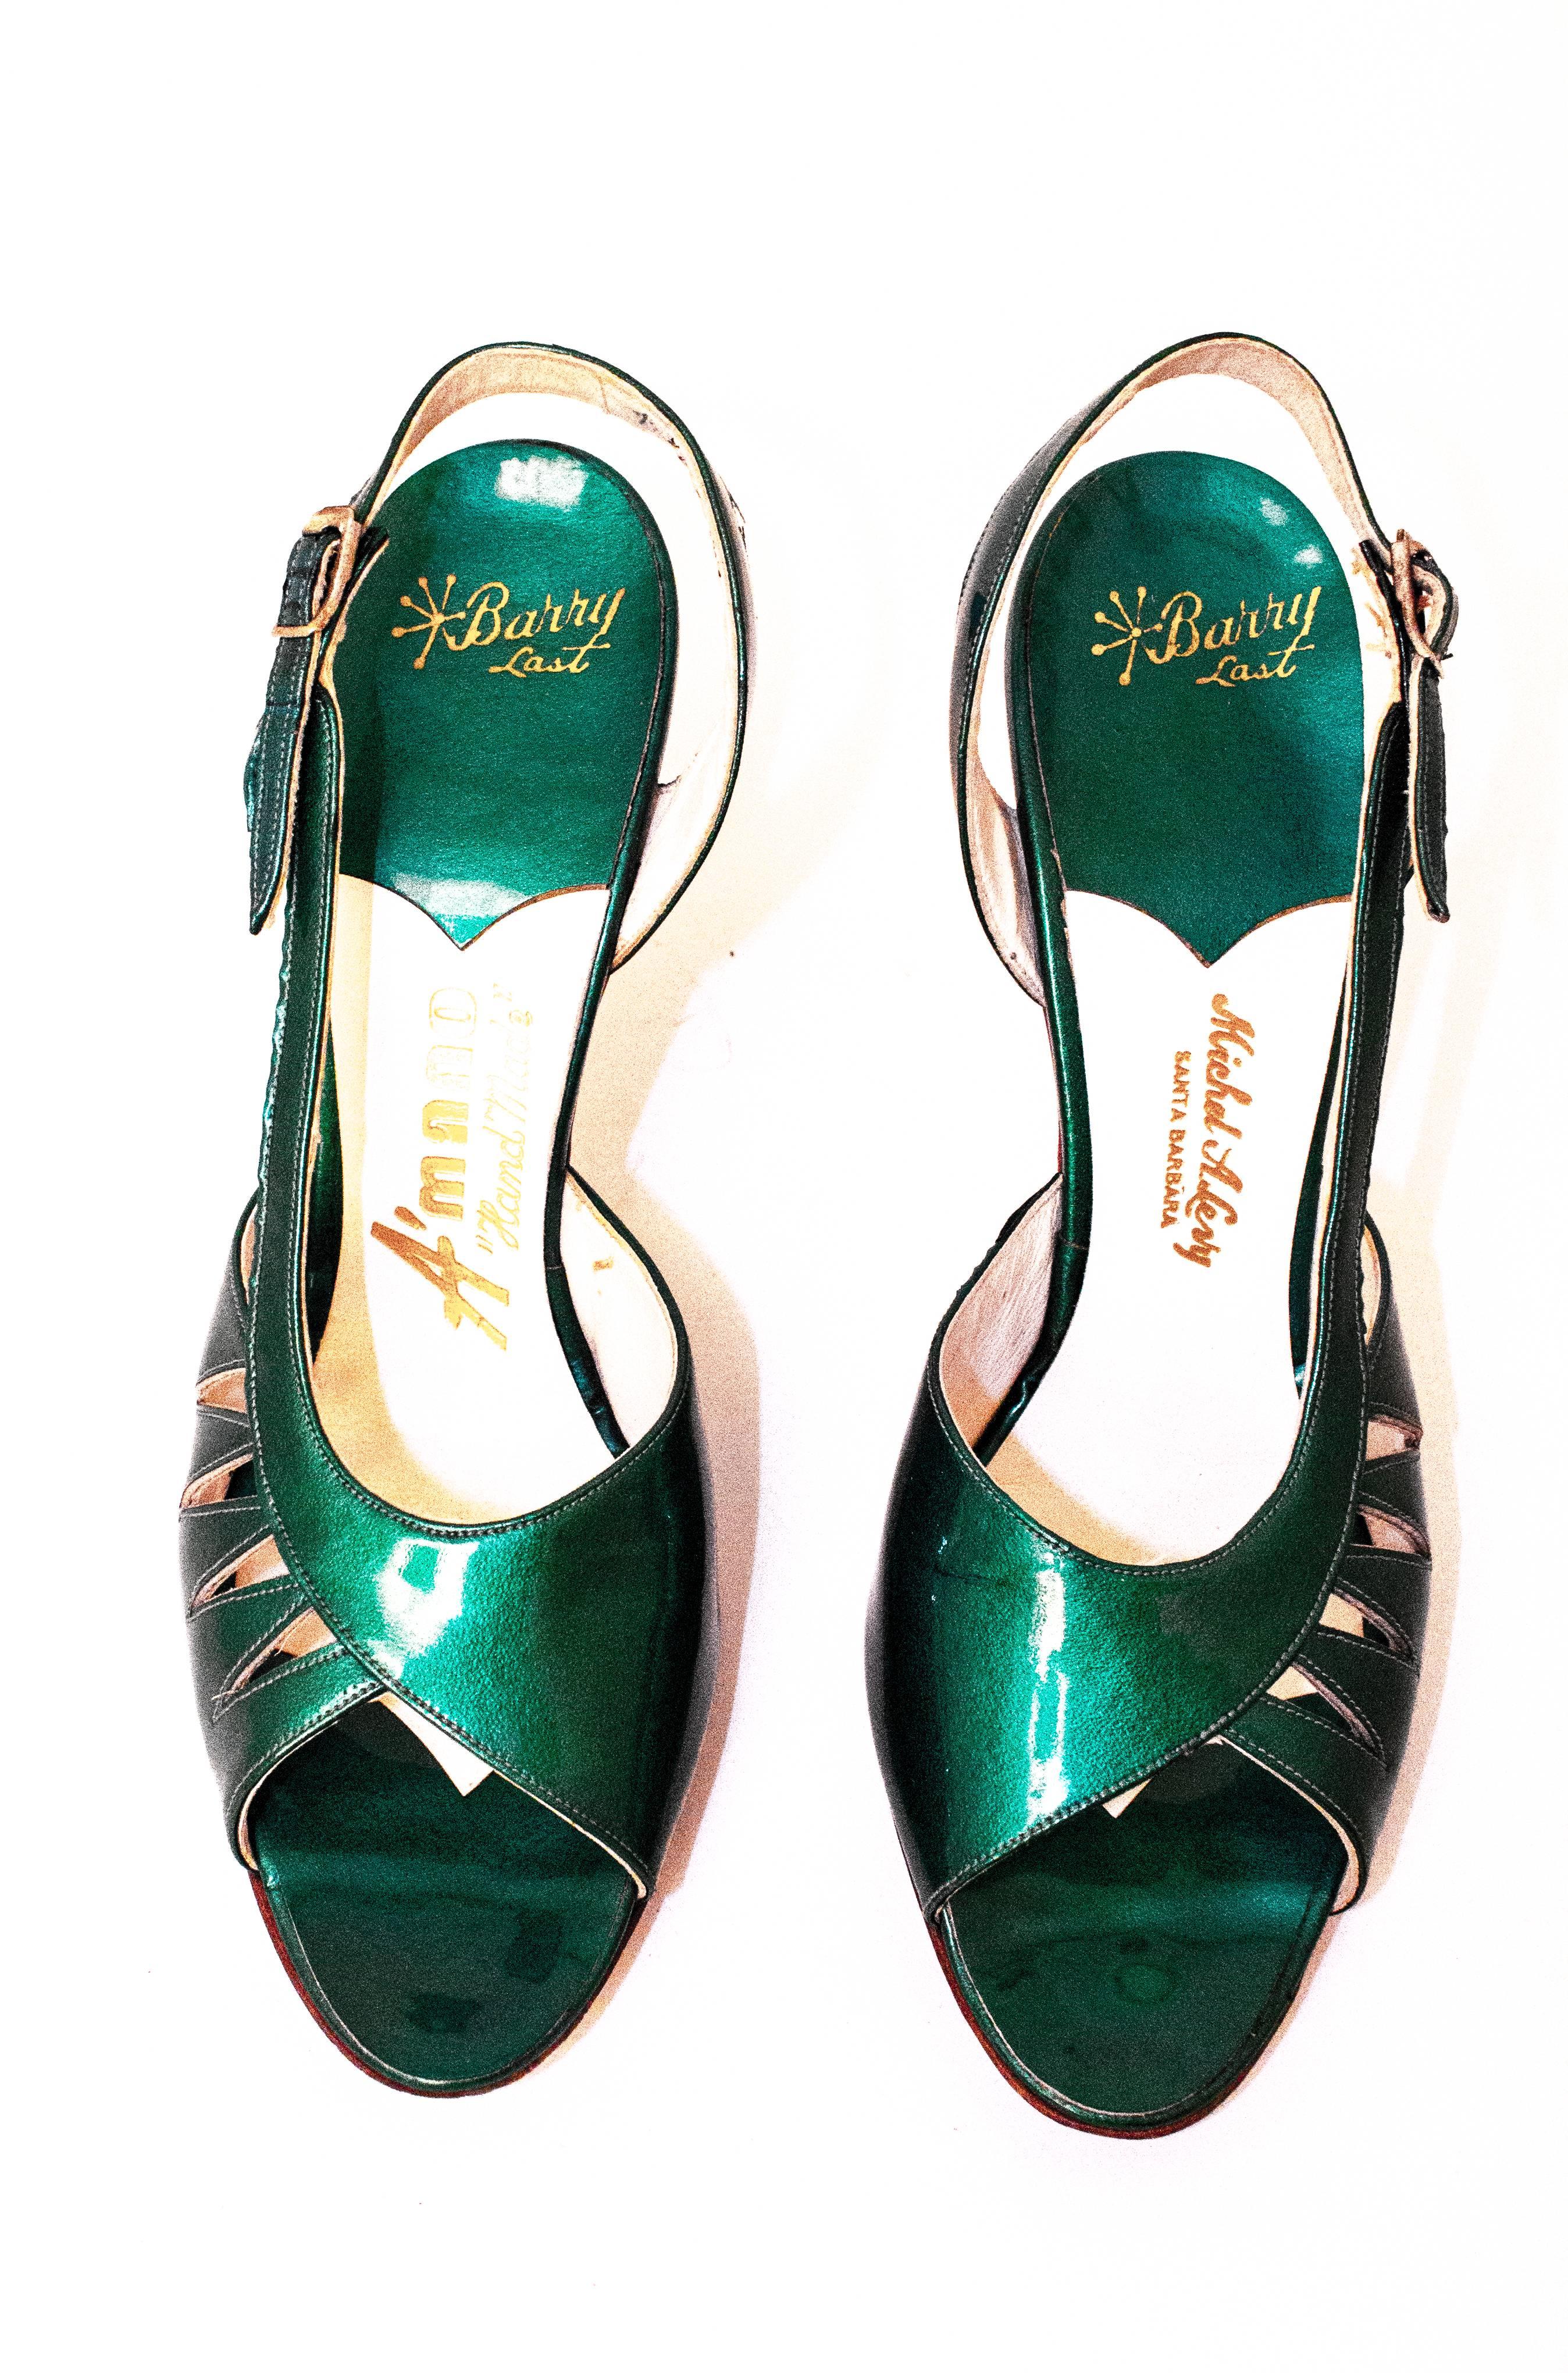 60s Green Patent Leather Slingback heel.  Measures 9 1/2 inches heel to toe. Palm of foot measures 3 inches wide. Heel measures 3 1/2.